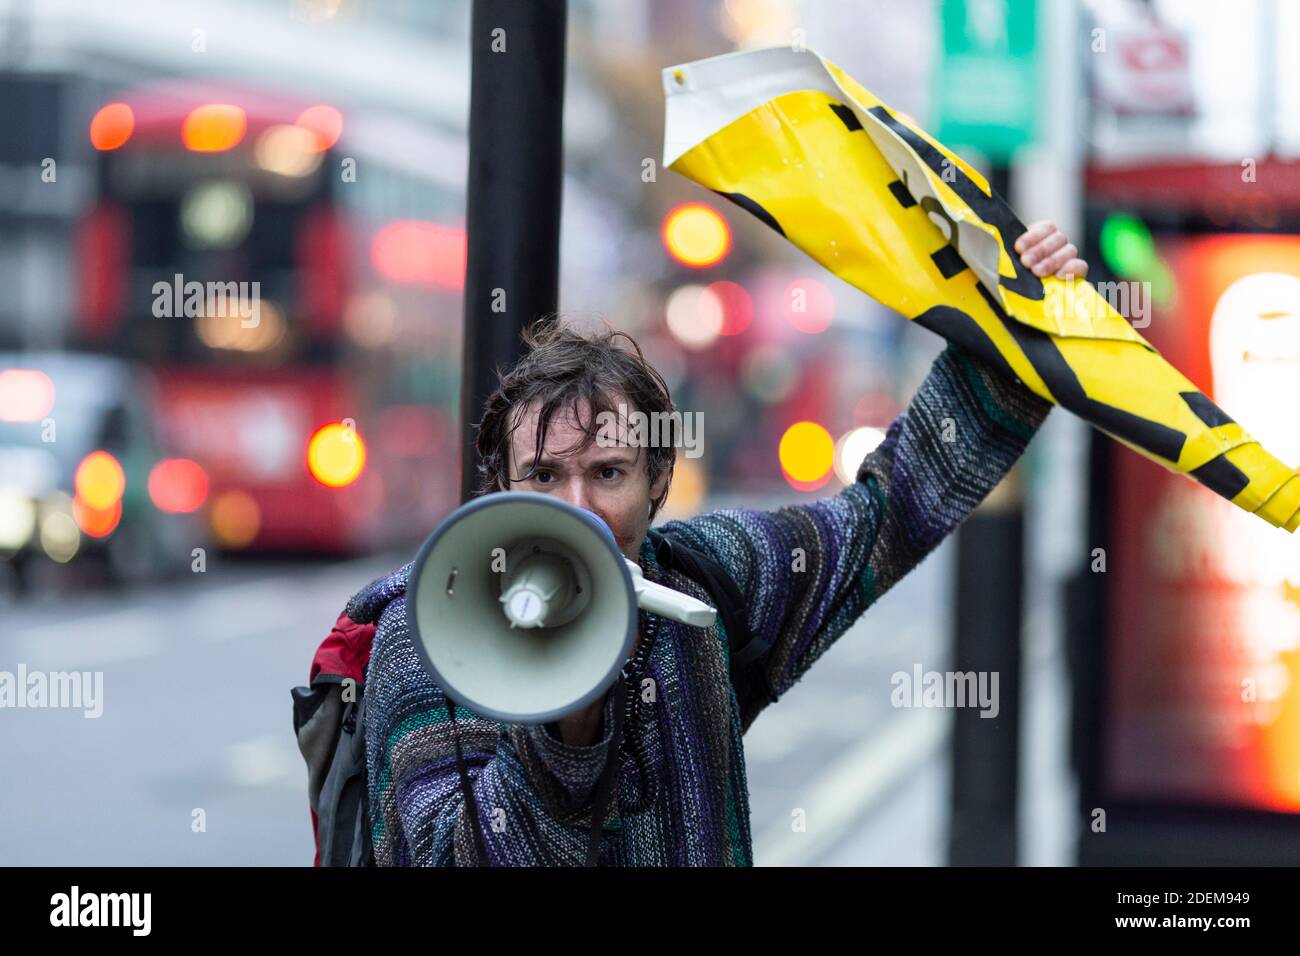 Anti-lockdown protest, London, 28 November 2020. A protester speaks into a megaphone on Oxford Street. Stock Photo